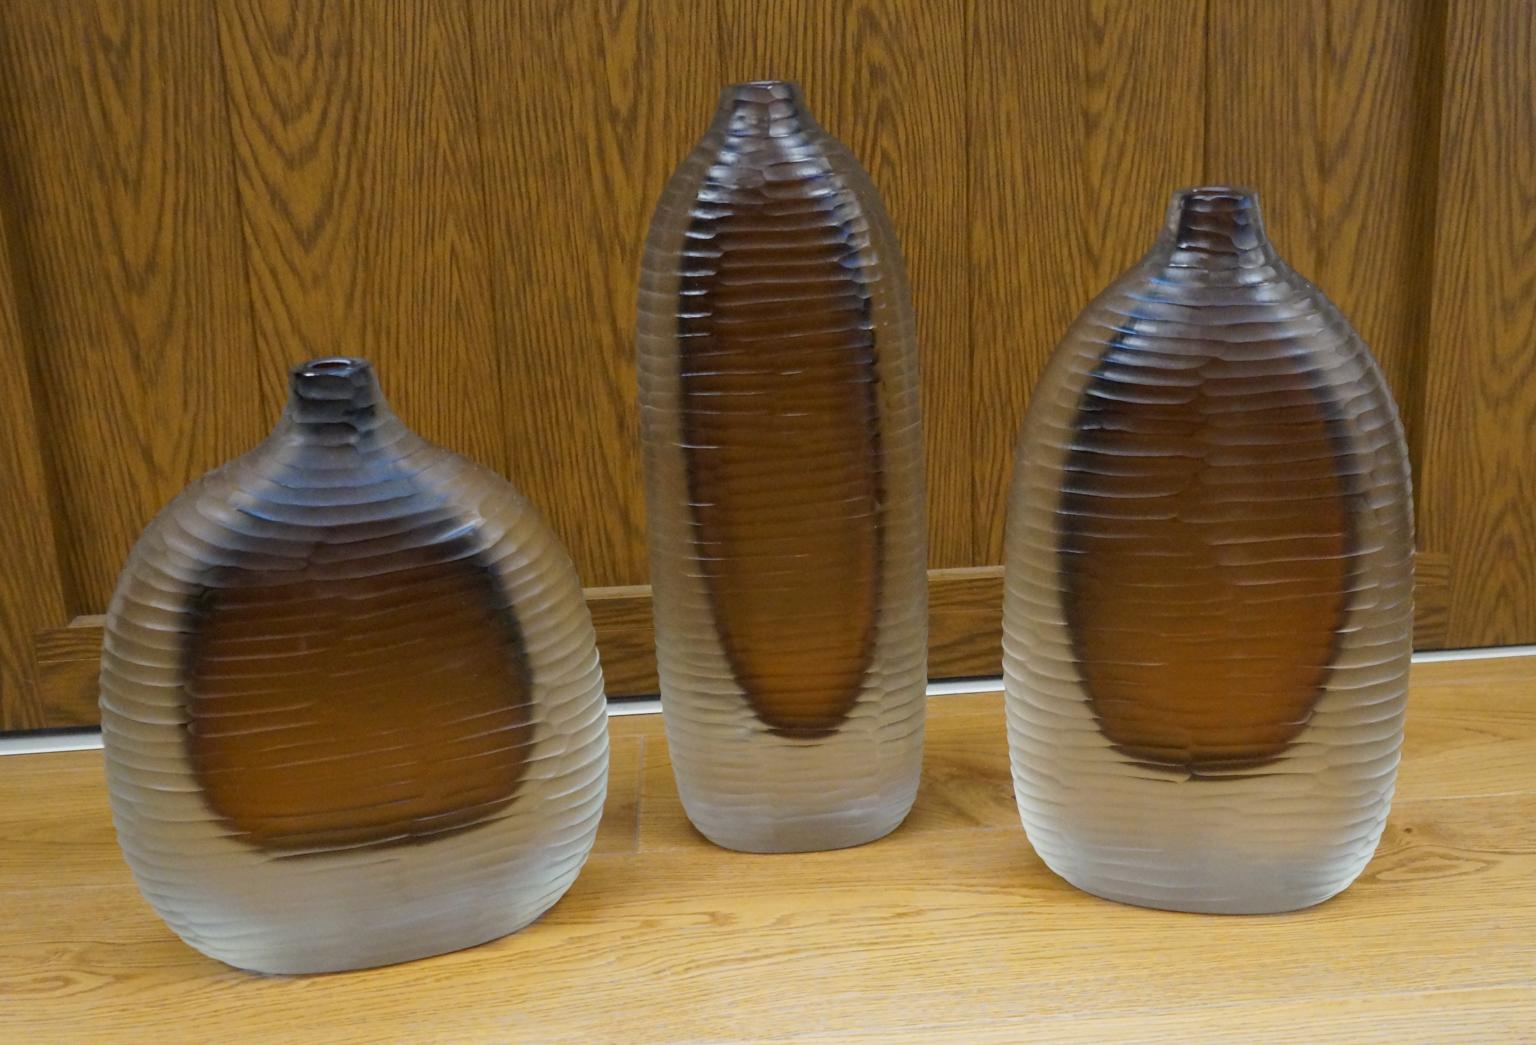 Three Murano blown glass vases Molato (engraved), color clear and amber inside.
To perform this work we need two different processes: the first, to model the hot vase giving form and color. 
The second, after cooling, it is taken into Moleria